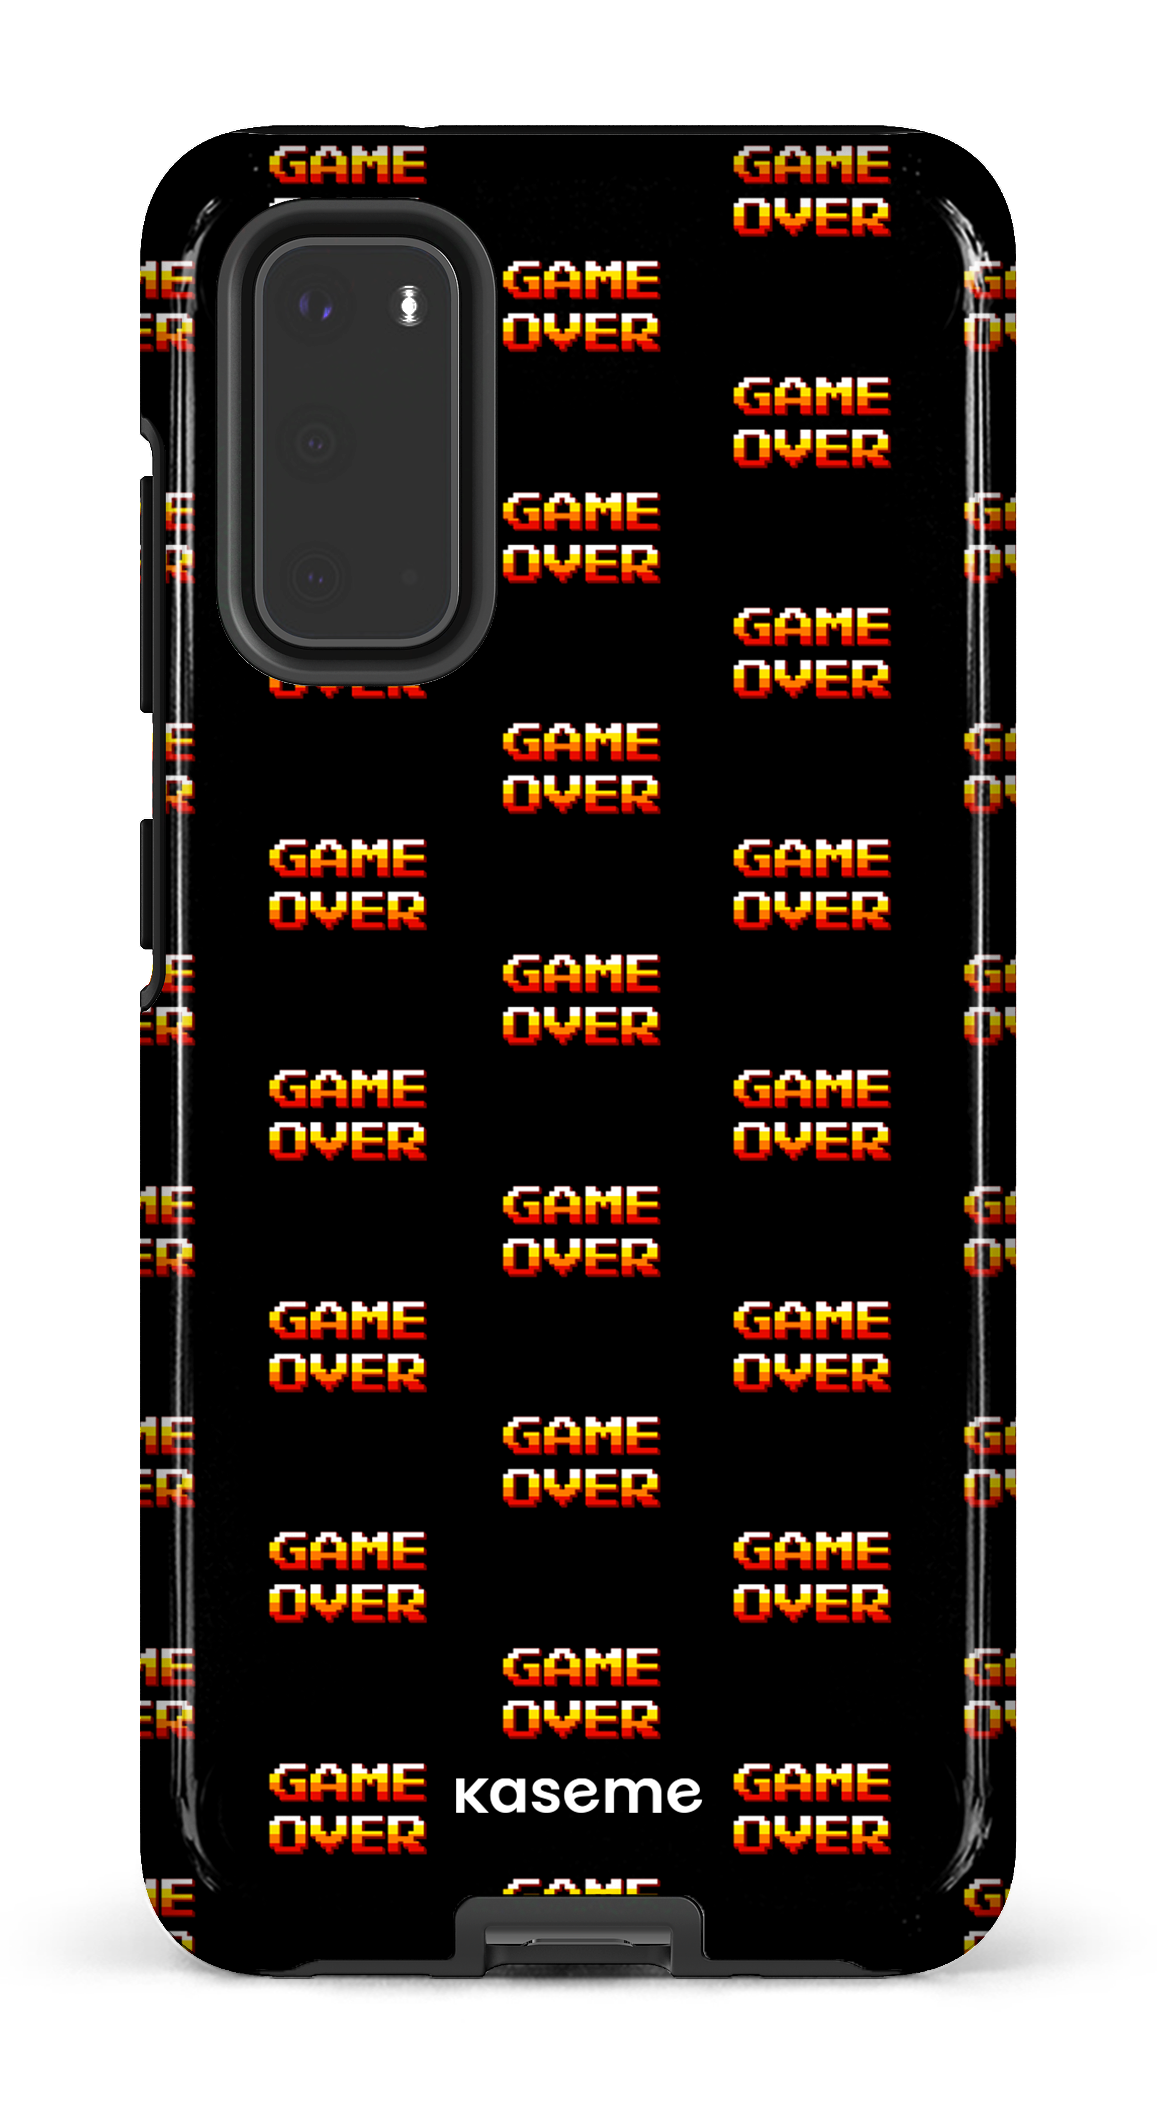 Game Over by Mathieu Pellerin - Galaxy S20